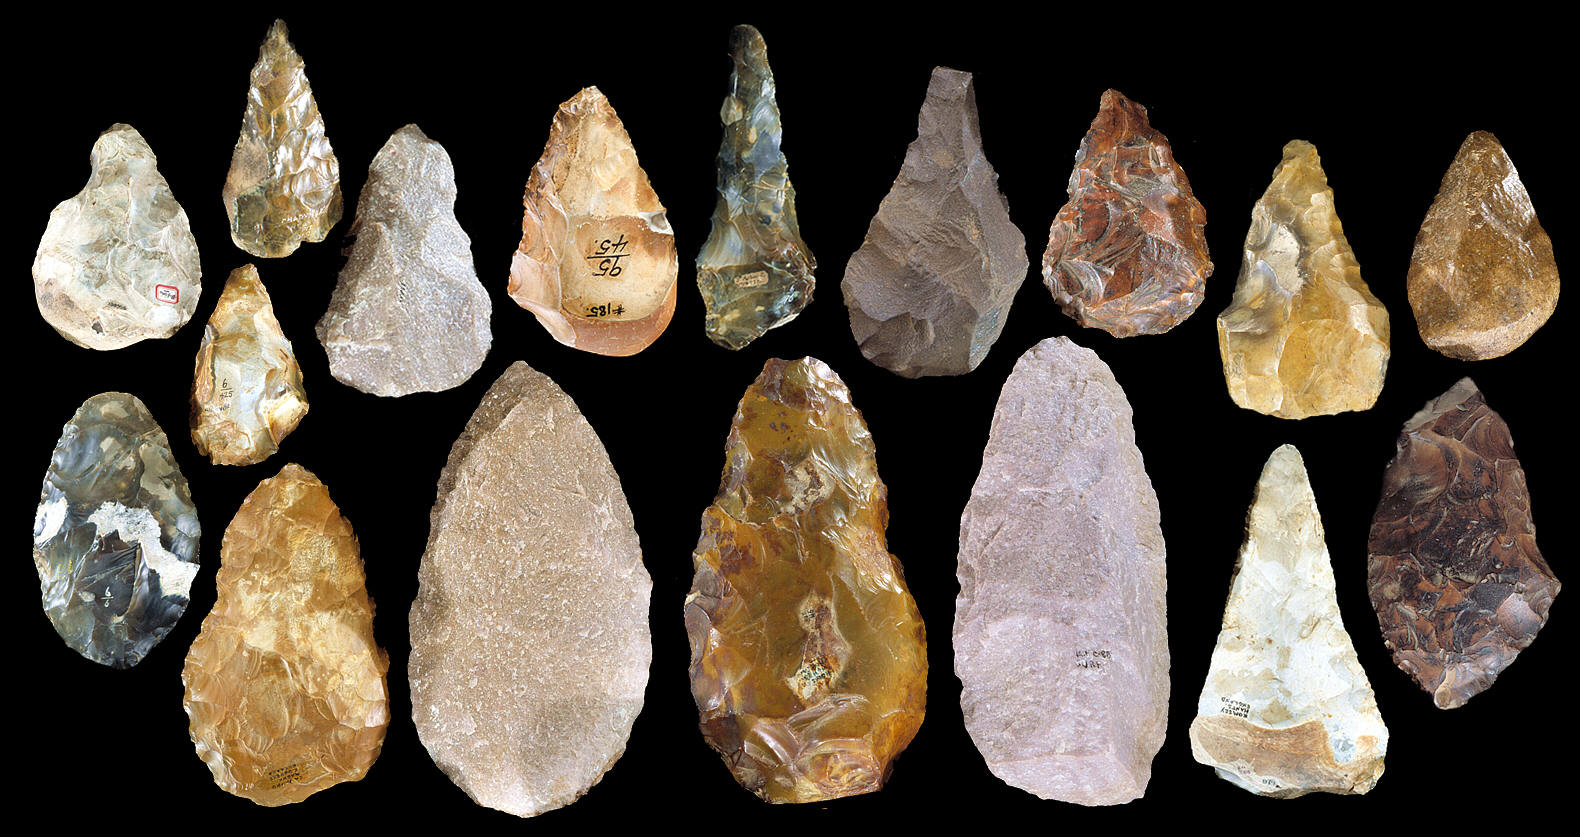 Researchers shocked by huge find of stone tools in India than can change our knowledge of human migration